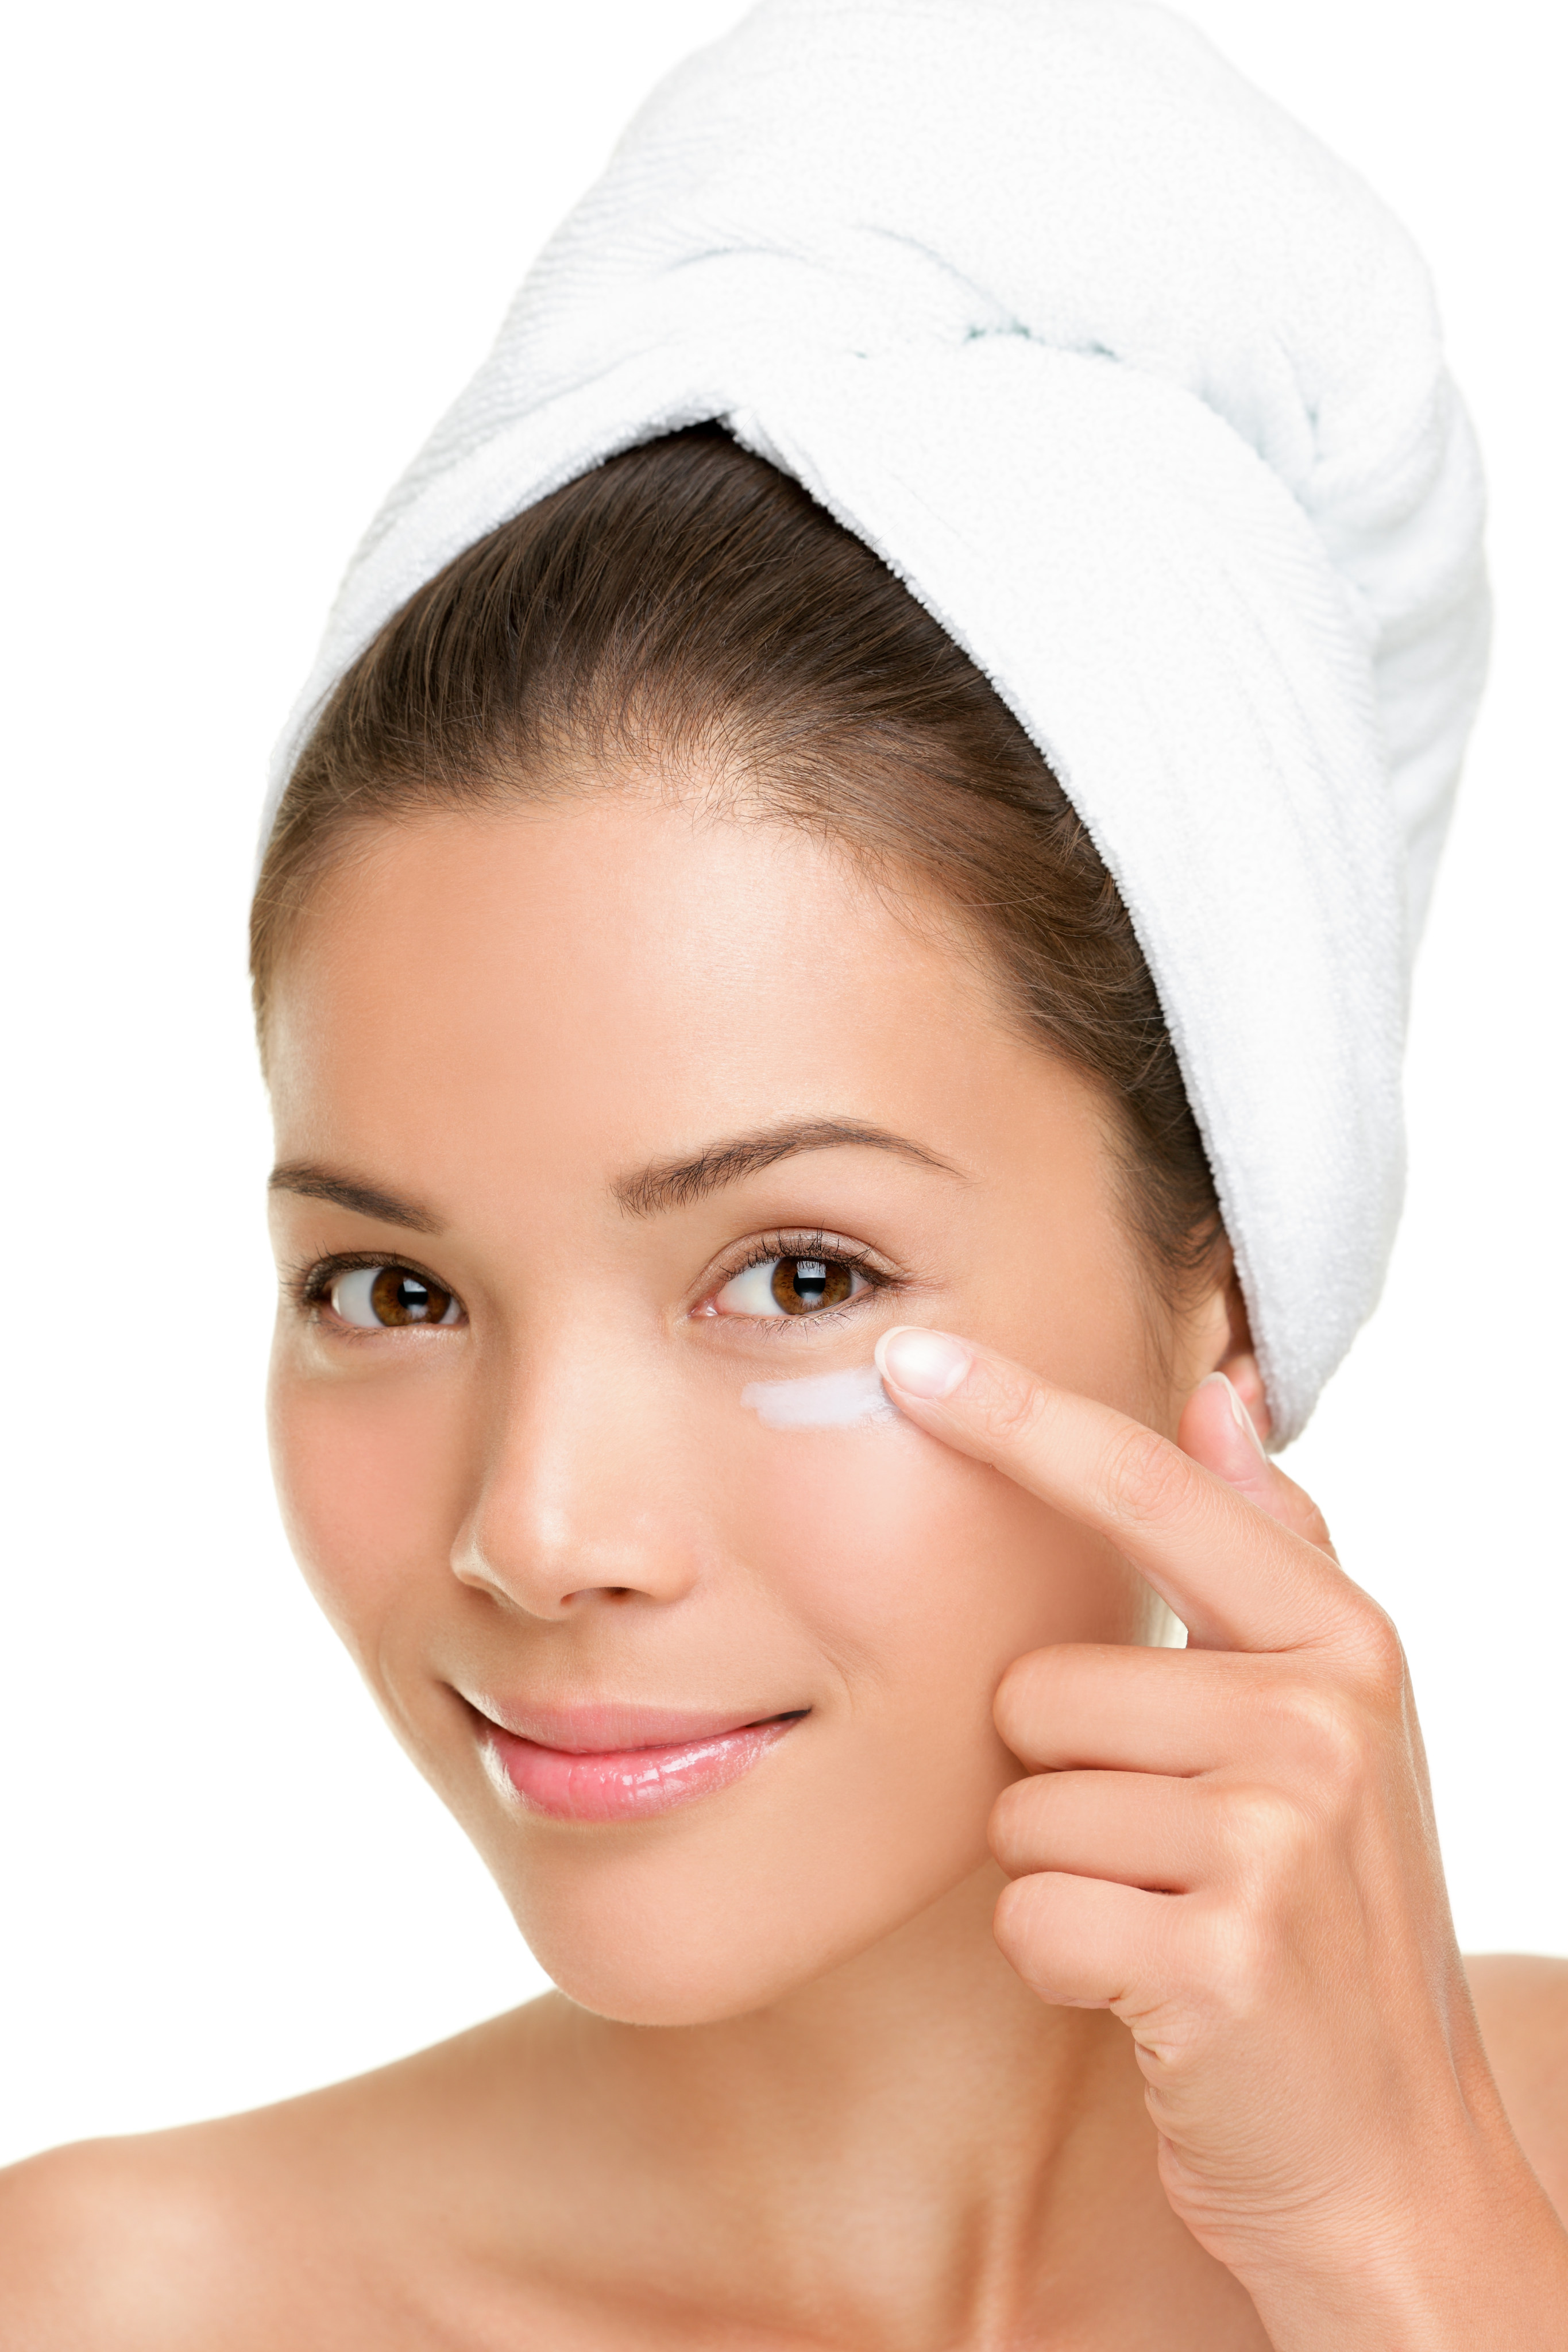 Today, almost every skin care brand offers an eye care product. Experts explain why they matter, and how to look for the best product for you. Photo: Shutterstock